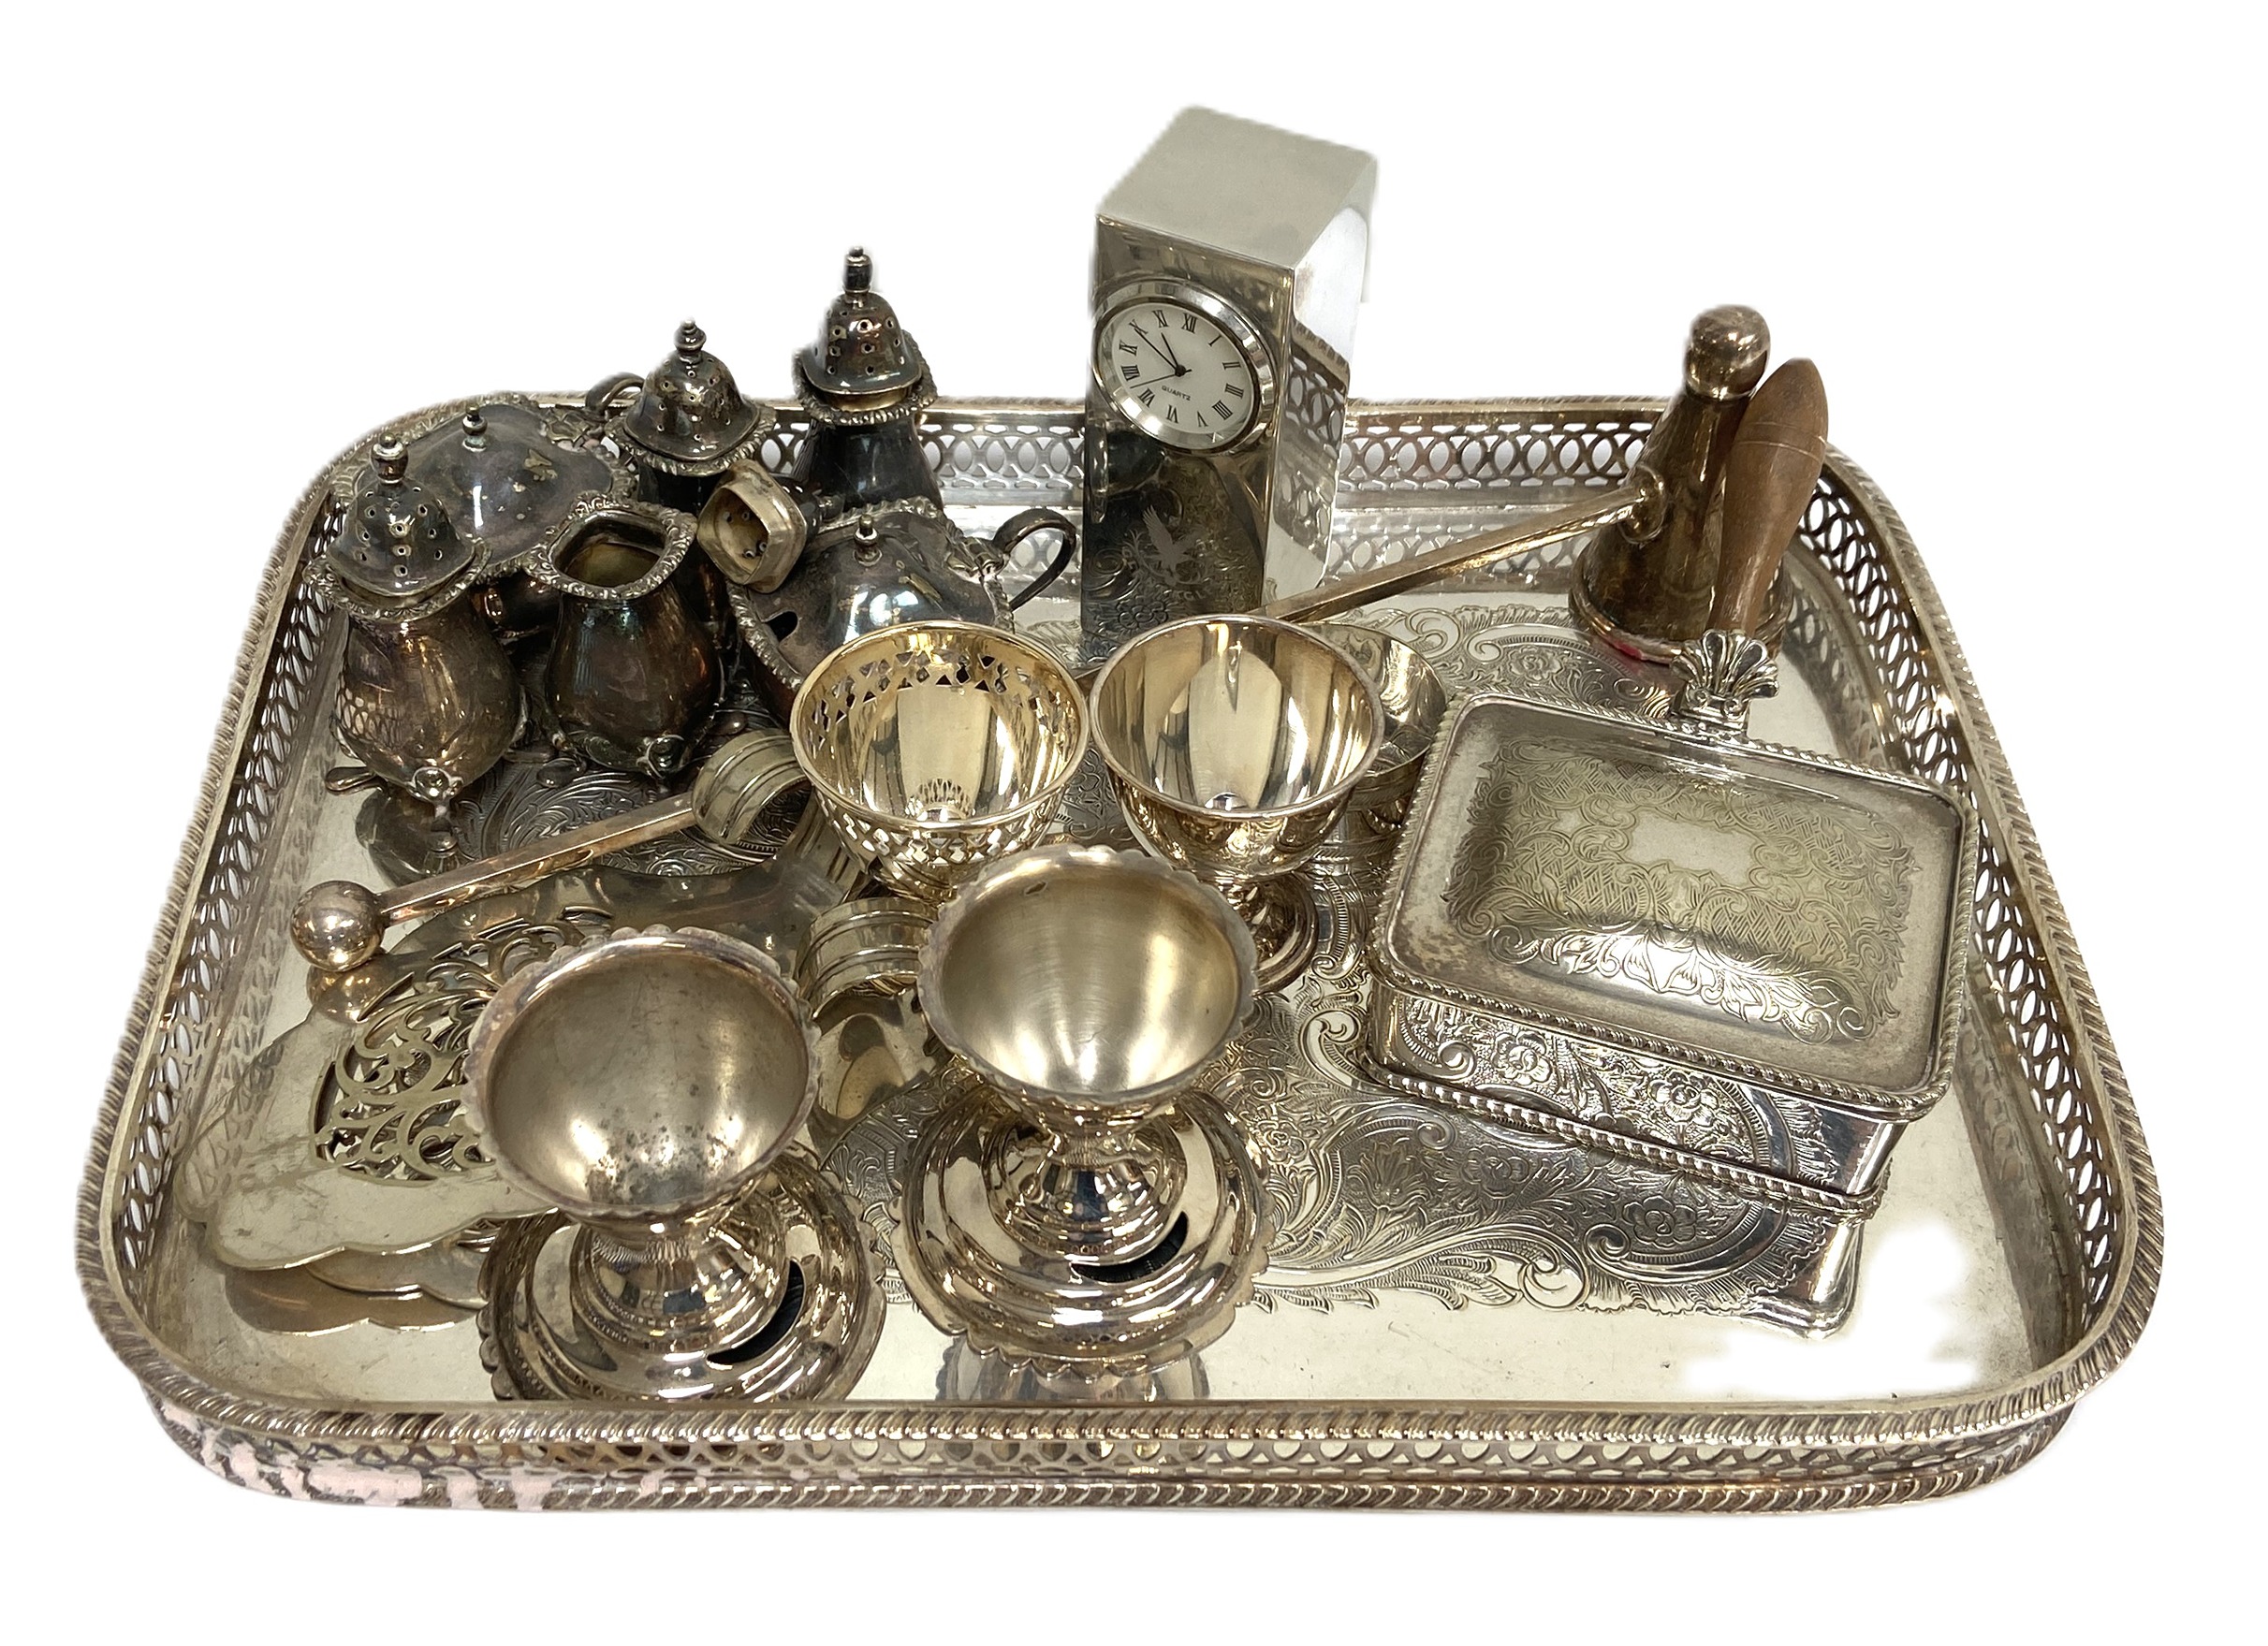 Assorted silver plate and related metalware, including a candle sniffer, various condiments, egg